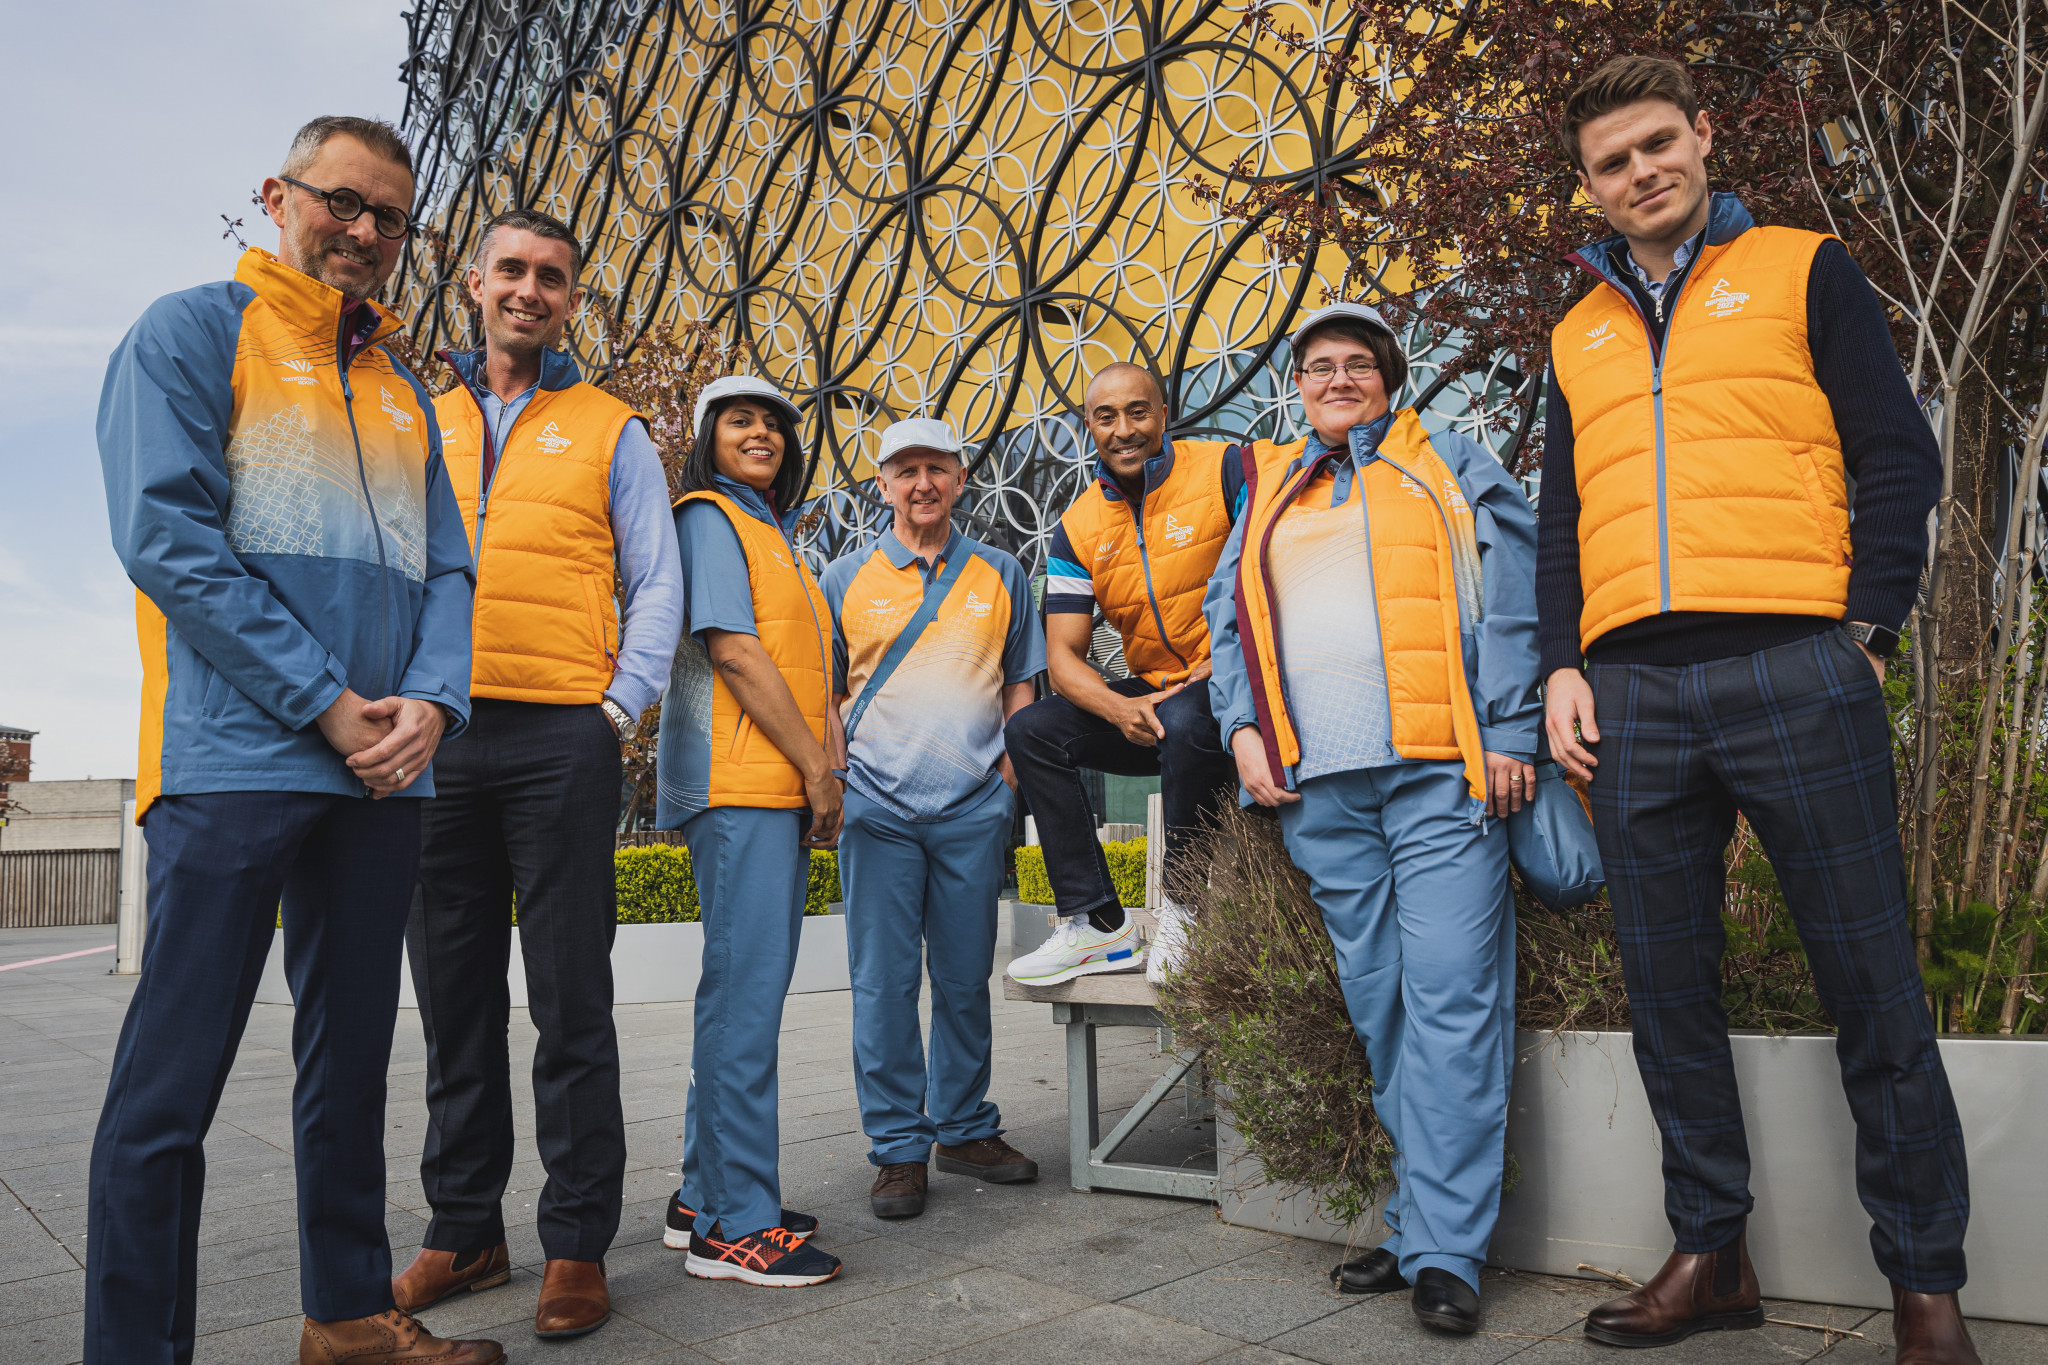 Birmingham 2022 uniforms manager, Max Jimminson, right, was focused on creating bright, vibrant, and noticeable clothing so the volunteers would stand out at the event ©Birmingham 2022